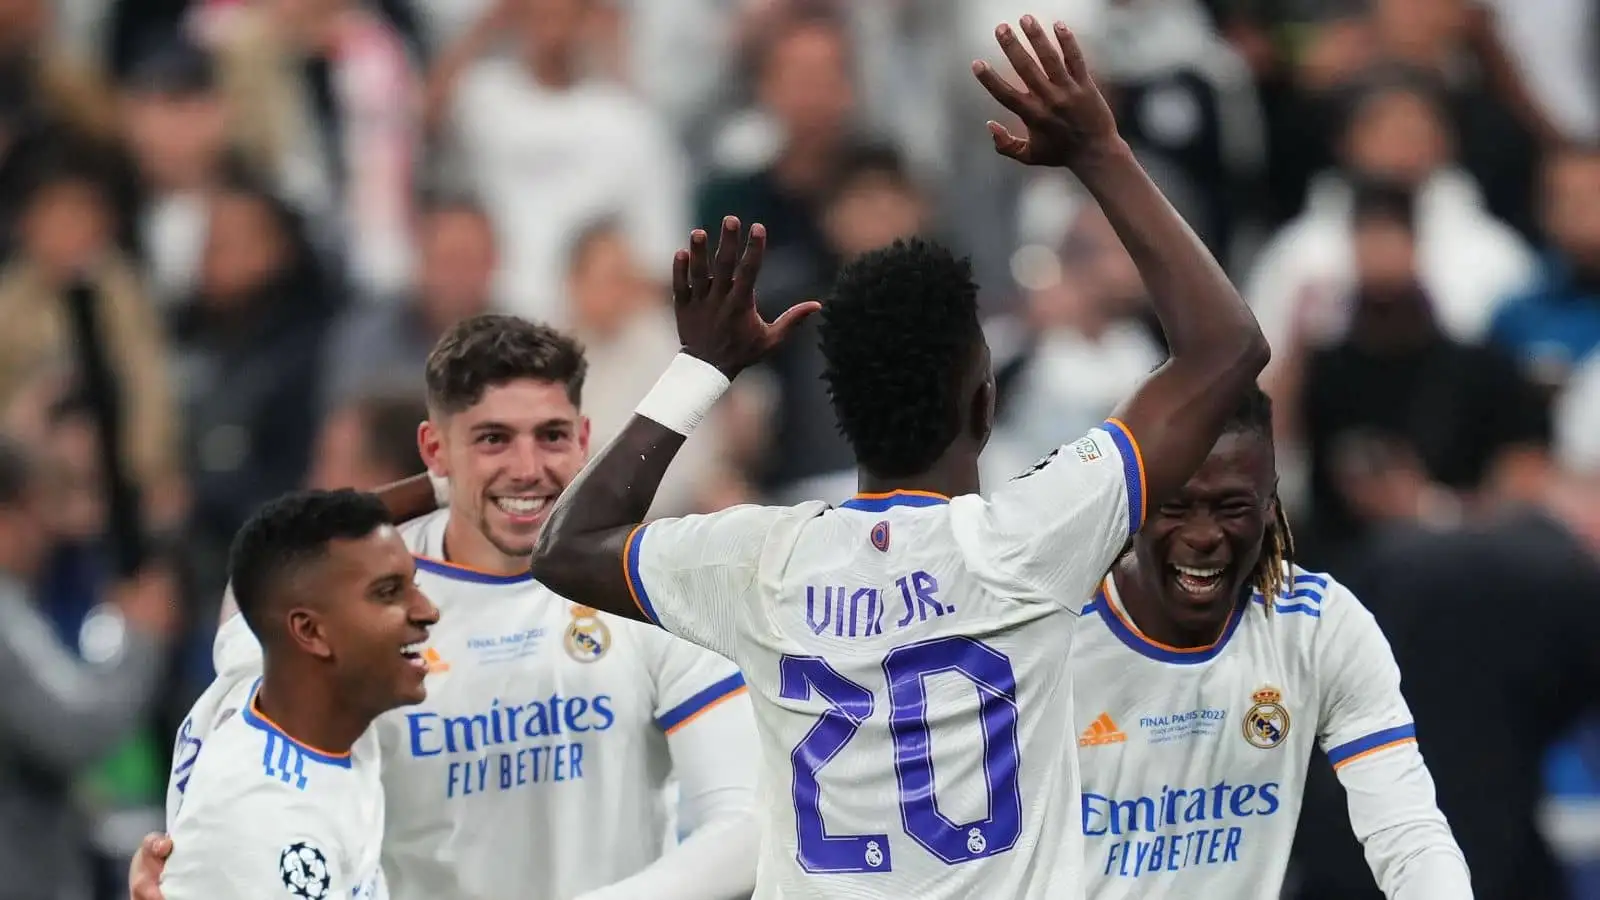 Rodrygo Goes, Fede Valverde, Vinicius Jr and Eduardo Camavinga of Real Madrid celebrating the victory at full time during the UEFA Champions League Final match between Liverpool FC and Real Madrid played at Stade de France on May 28, 2022 in Paris